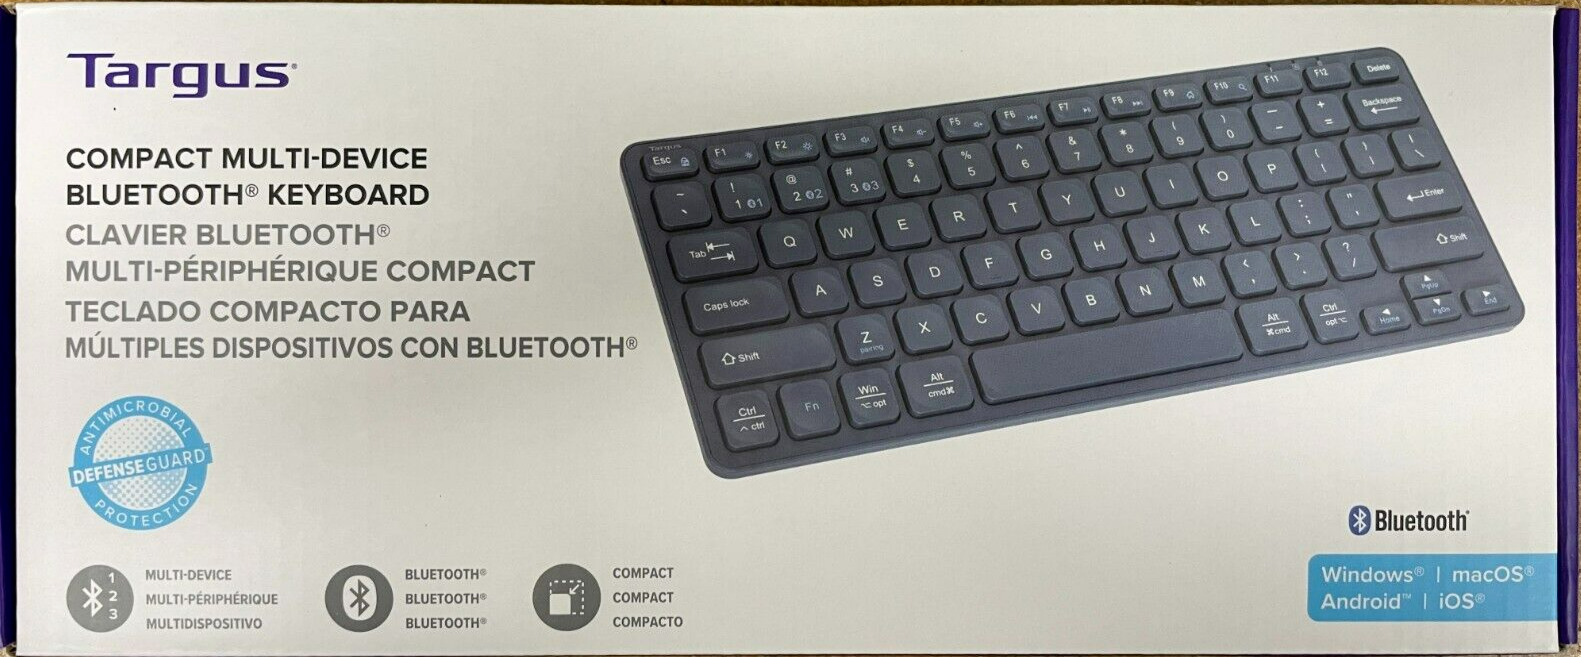 BRAND NEW Targus AKB862US Compact Blue Tooth Keyboard Multi-Device